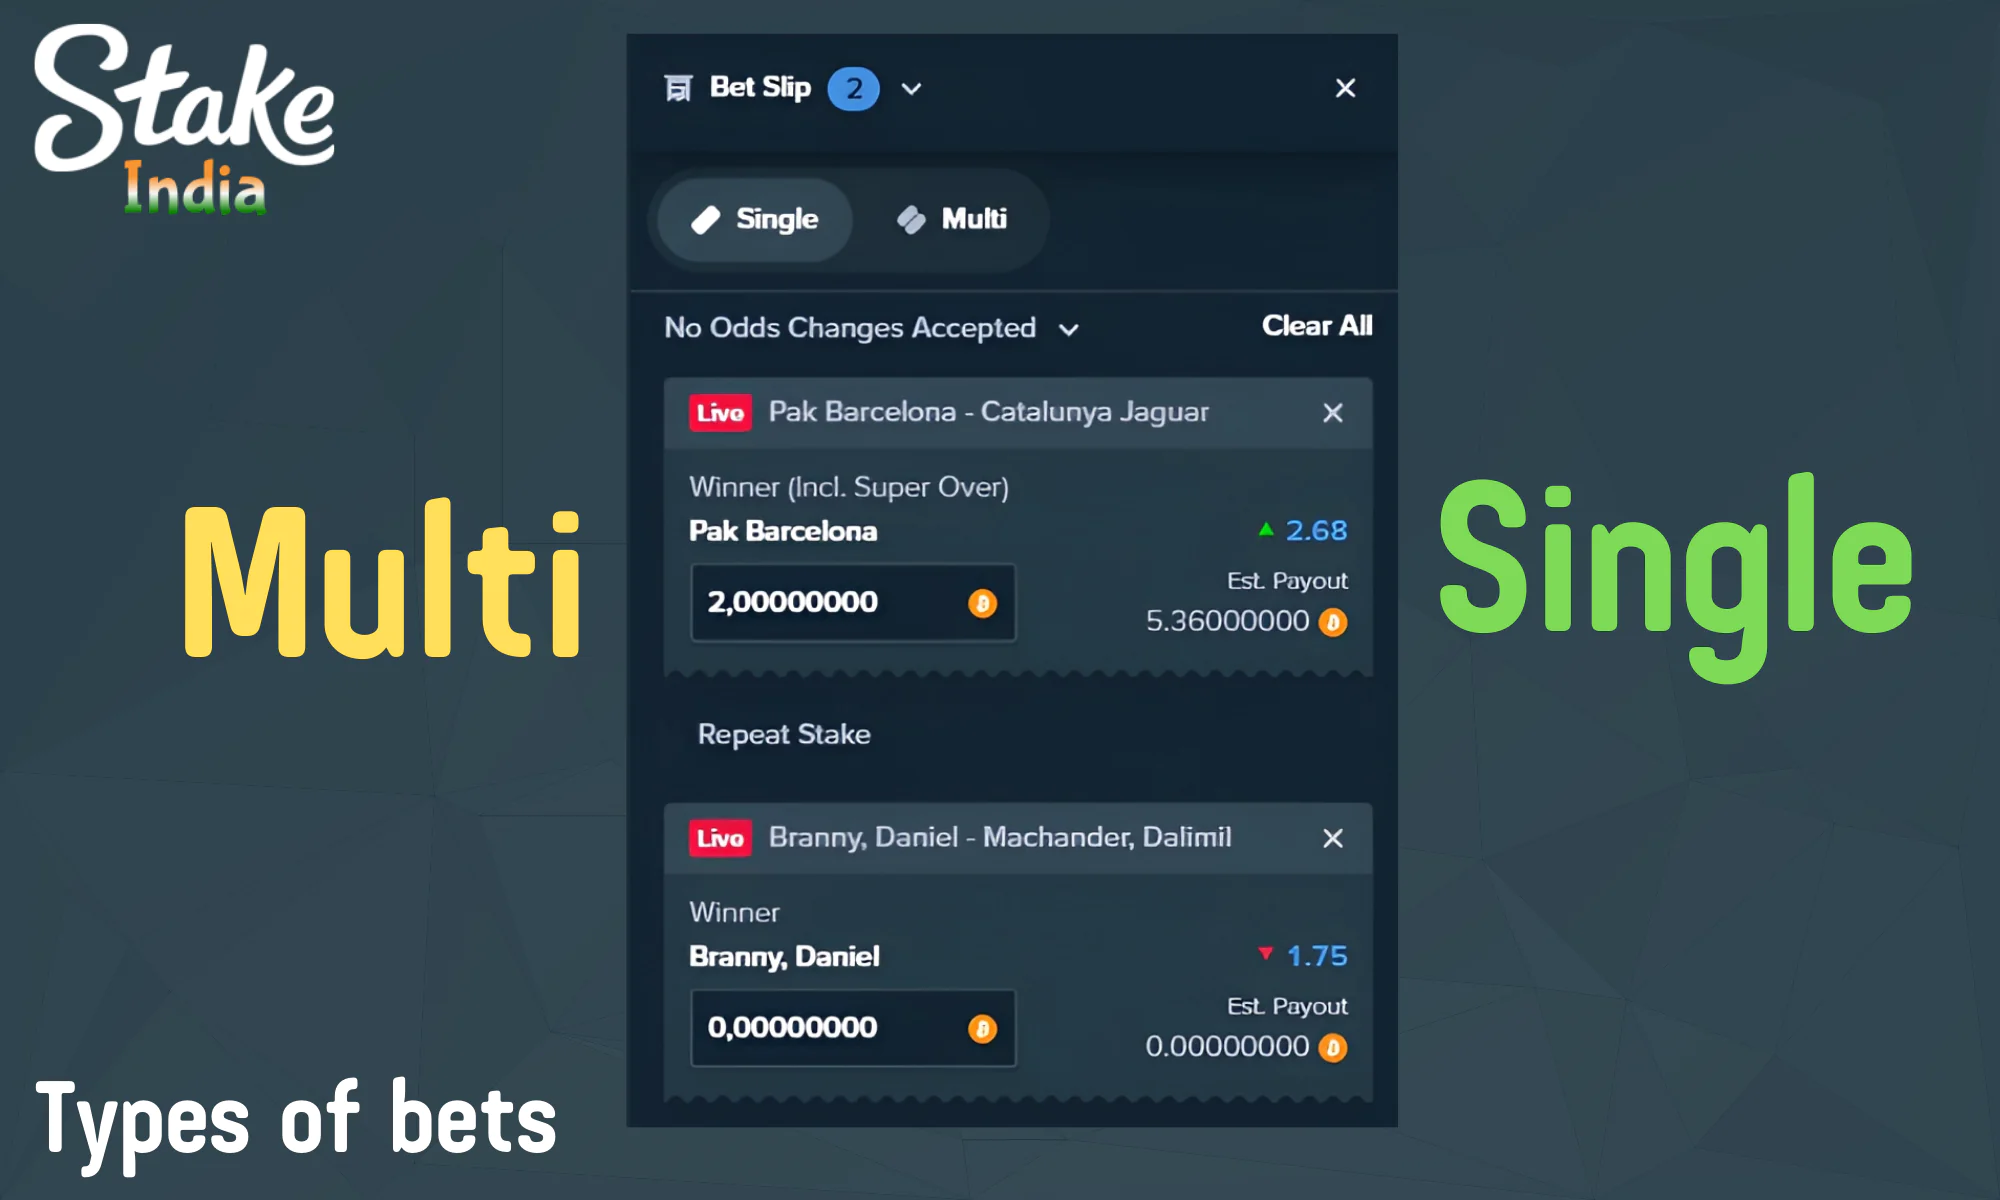 Stake offers 2 types of bets, single and multiple